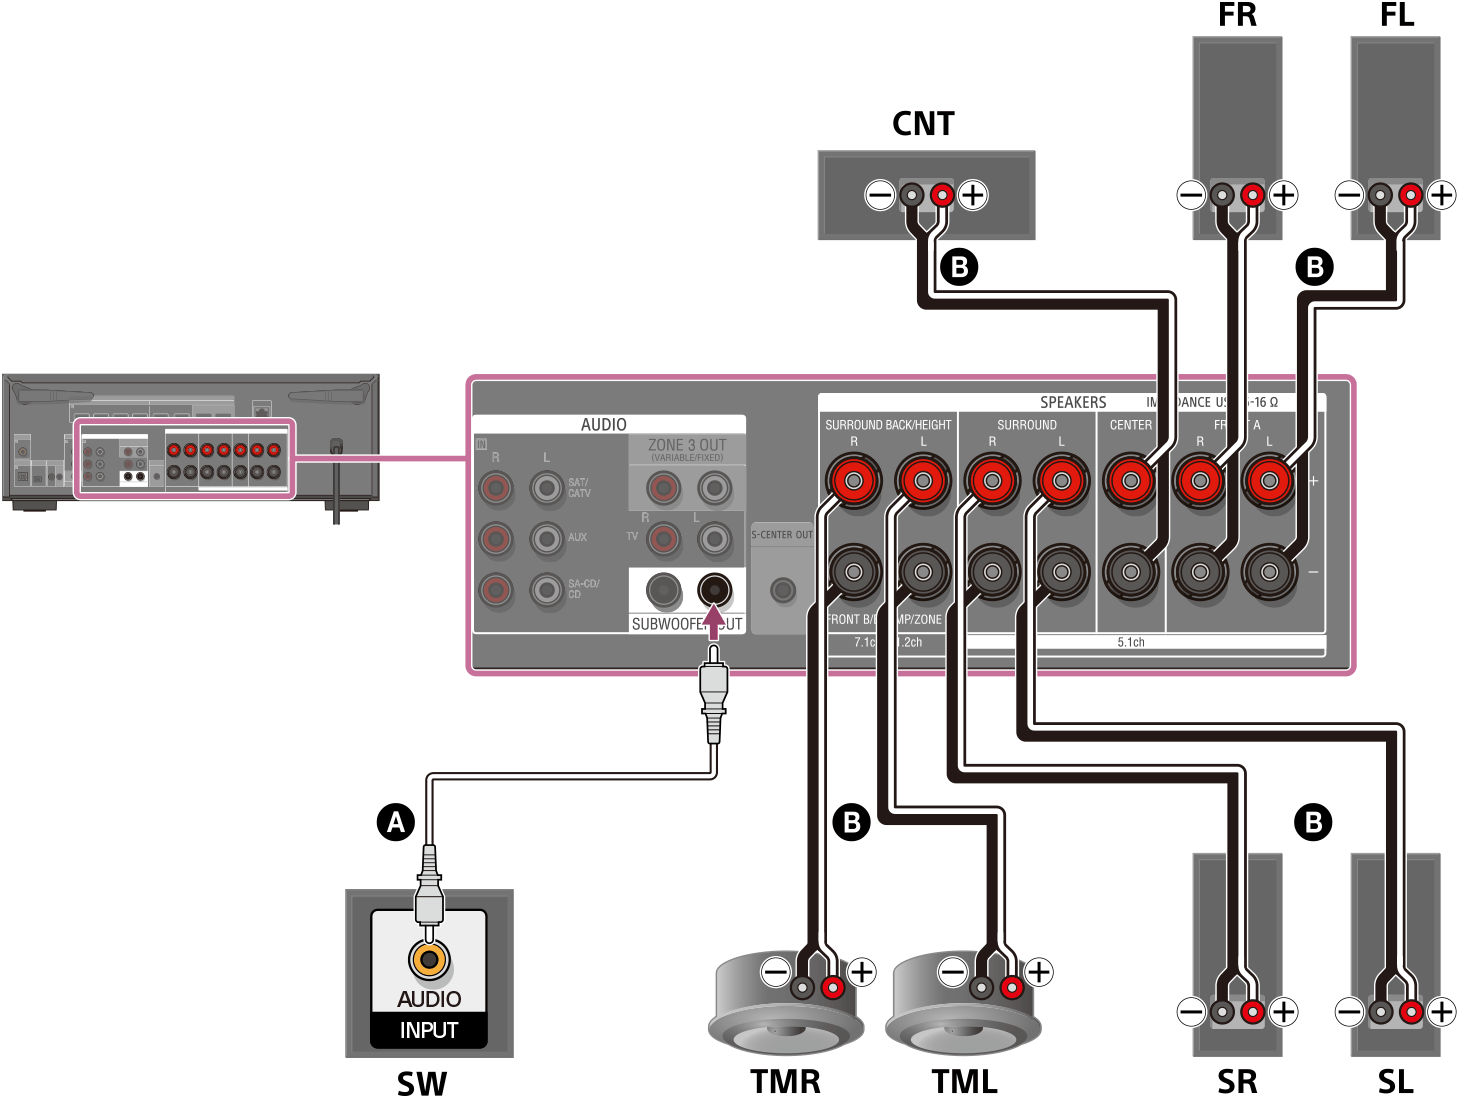 Illustration of connecting each speaker to the speaker terminals on the rear of the unit. Connect the left and right front speakers, left and right surround speakers, left and right top middle speakers, and center speaker to their respective speaker terminals using speaker cables (not supplied). Connect the subwoofer to the SUBWOOFER OUT terminal with a monaural audio cable (not supplied).